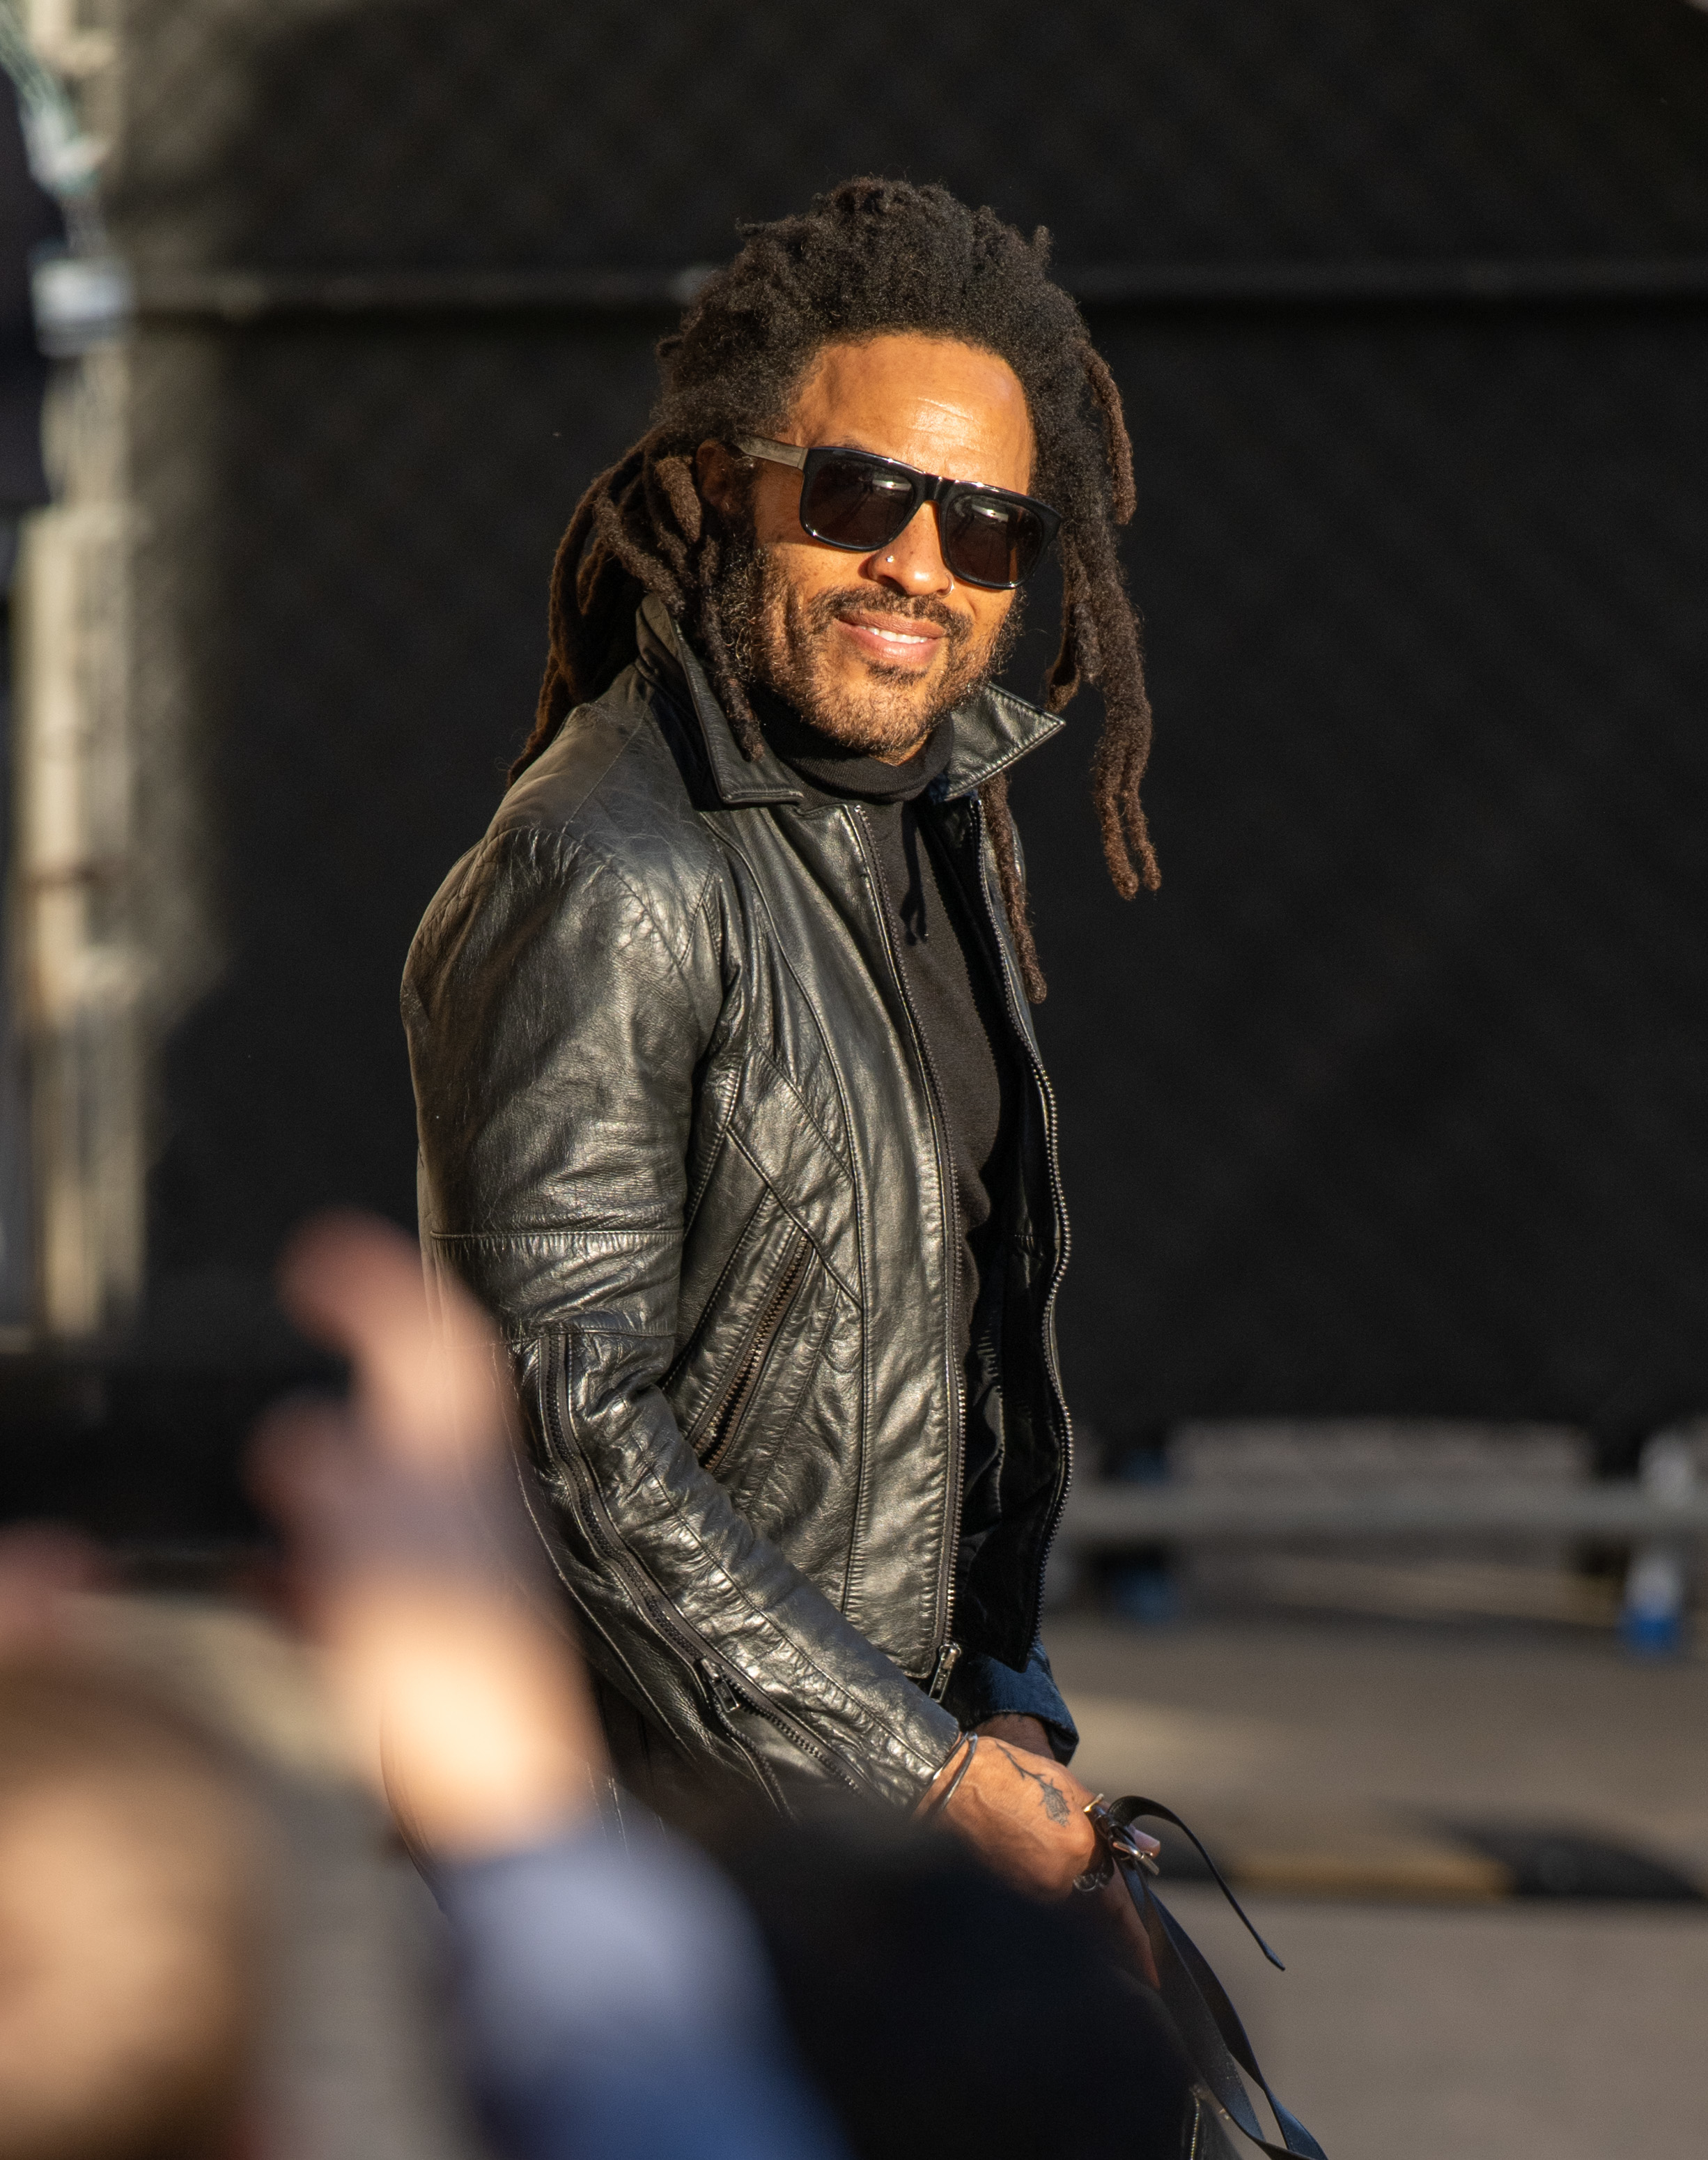 Lenny wearing a leather jacket and smiling as he walks past observers